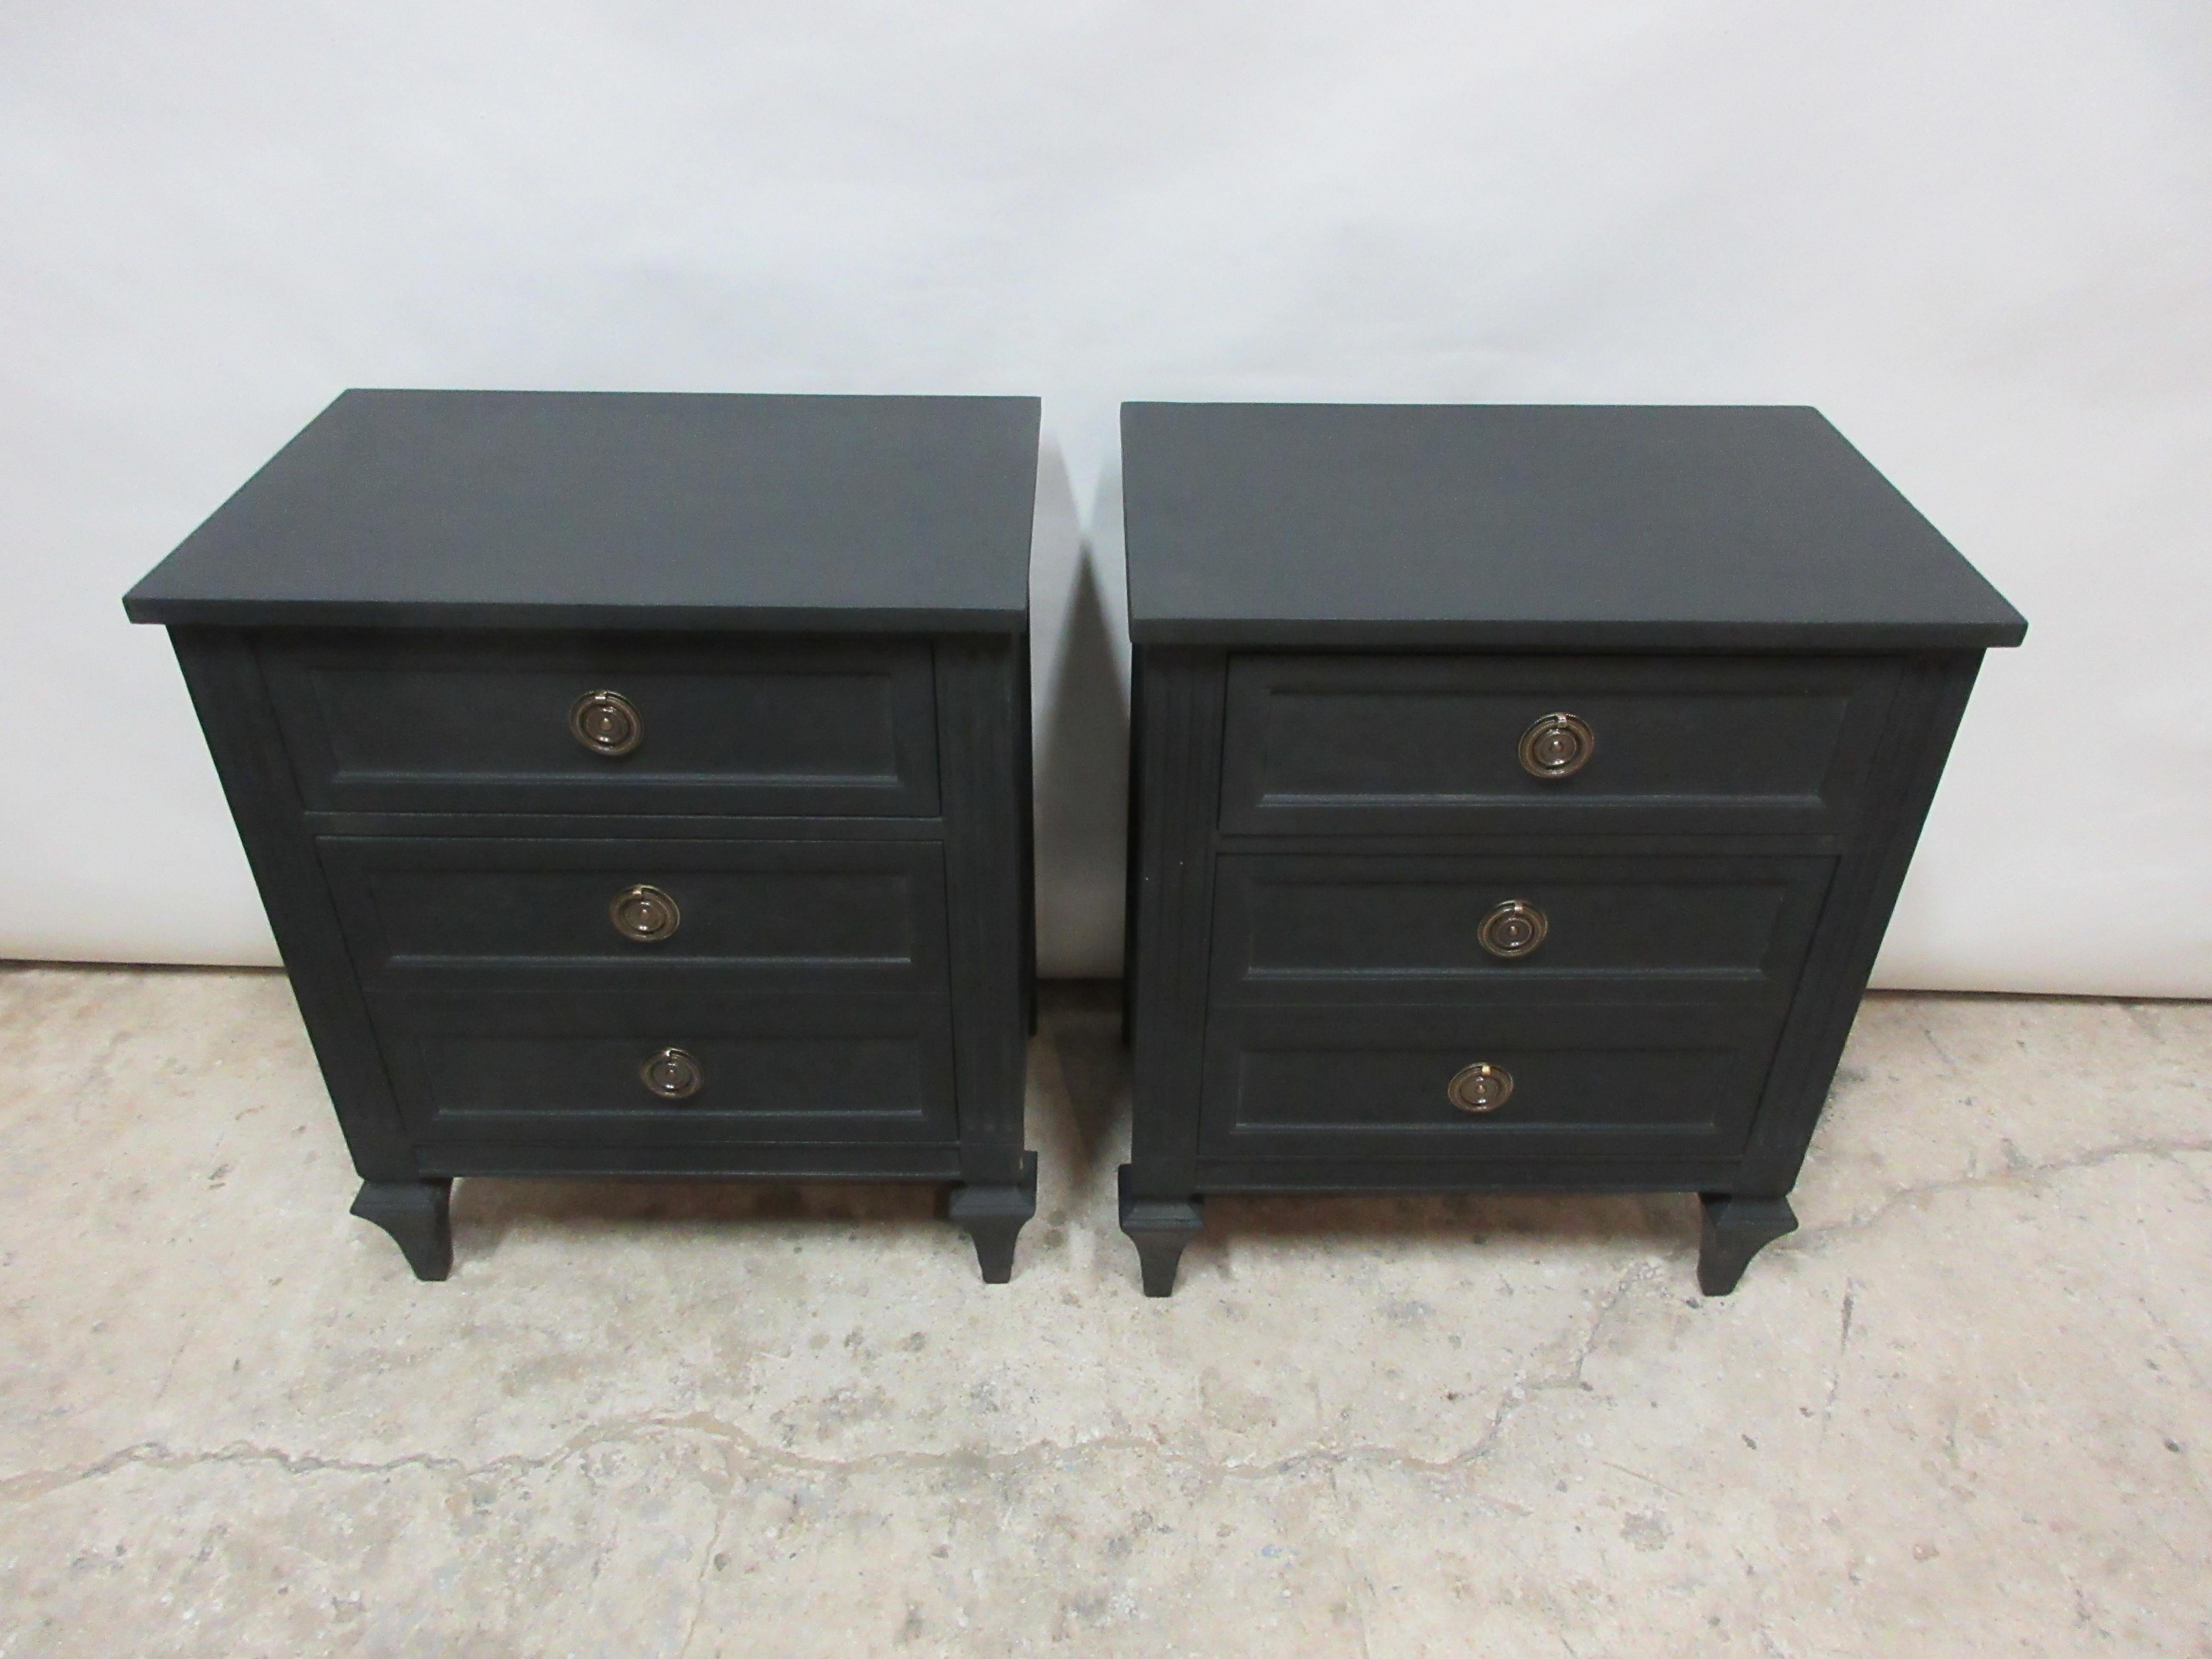 This is a set of 2 midnight black Gustavian Style nightstands. They have been restored and repainted with milk paints 